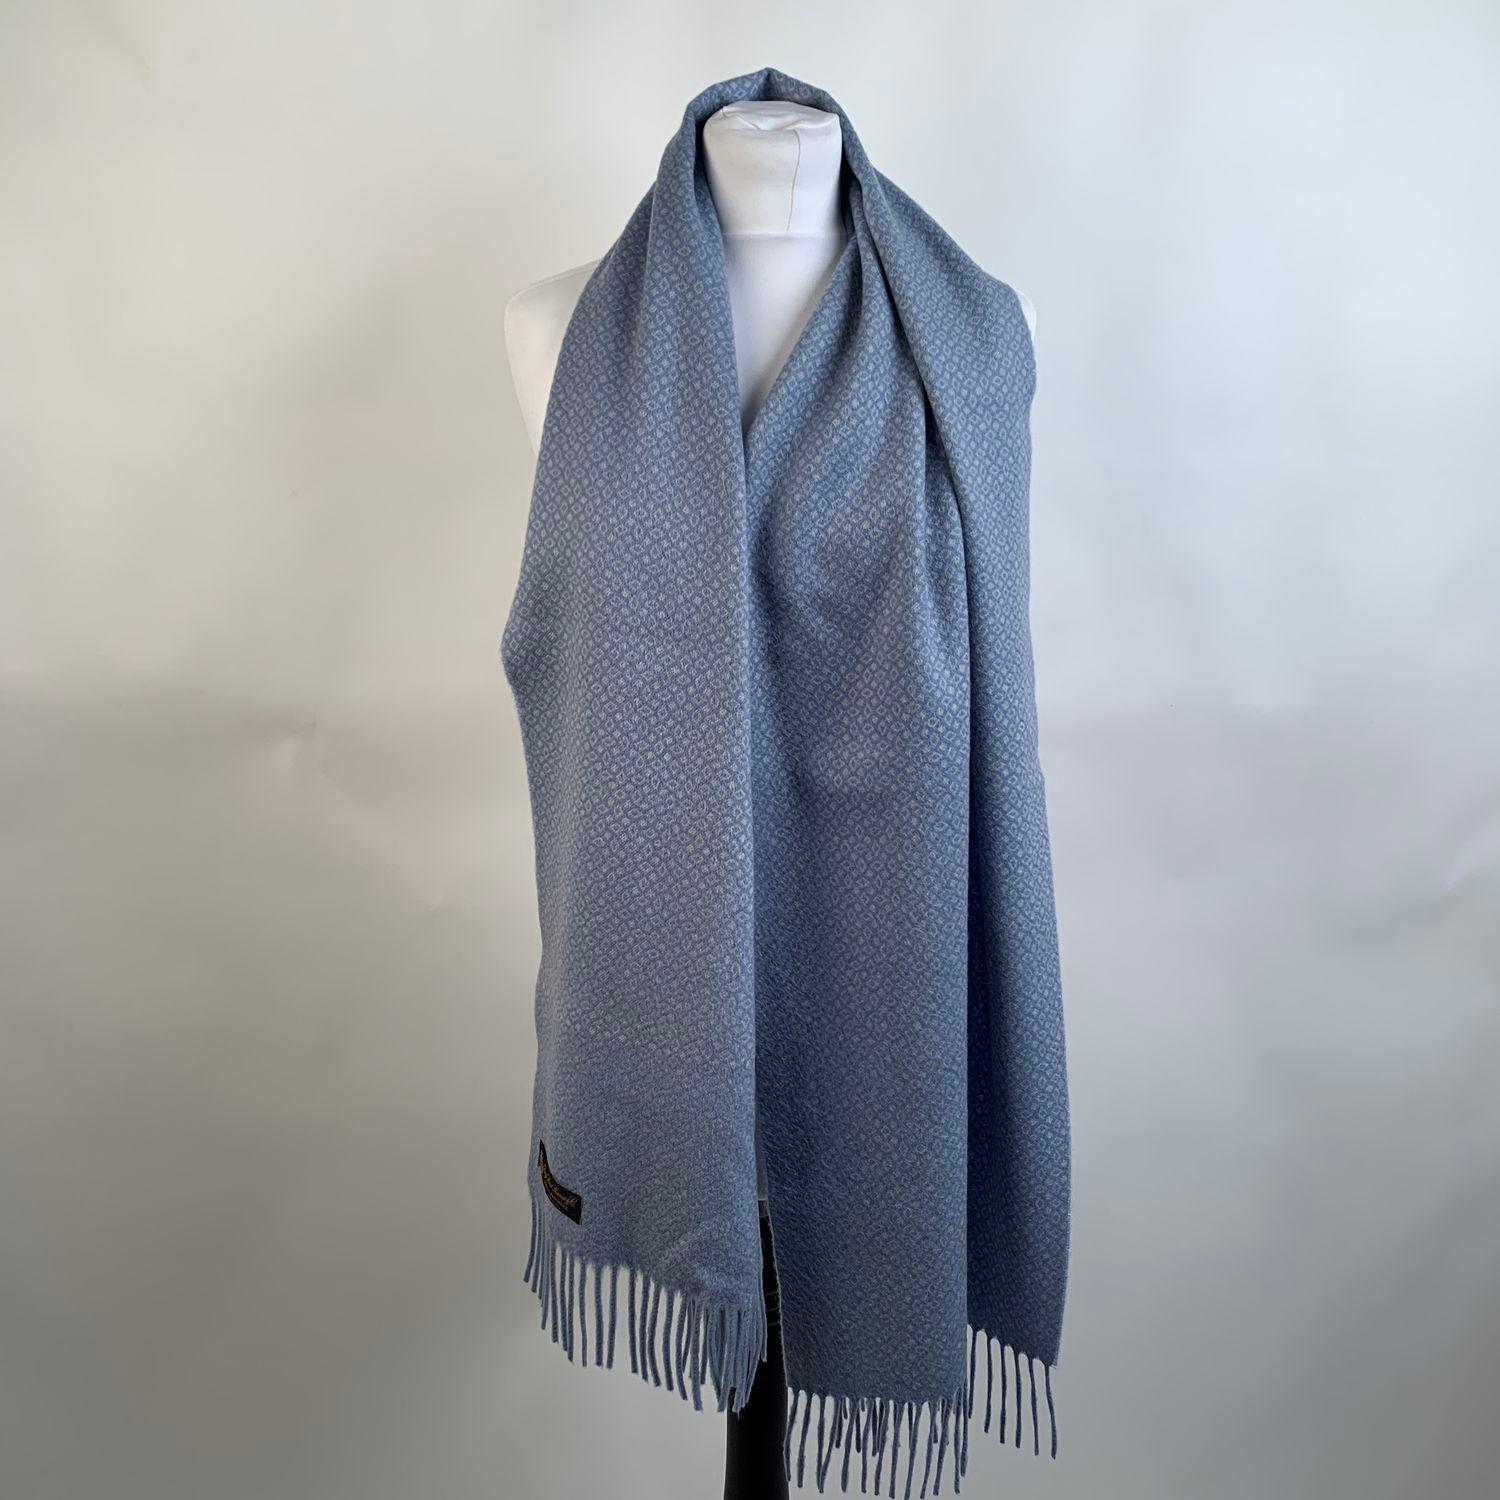 Vintage Loro Piana reversible cashmere large scarf. It features 2 sides: 1 in solid light blue and 1 with a lovely geometric design in light blue and white color. Fringed hem. Composition: 100% cashmere. Made in Italy. Width: 17 inches - 43, 2 cm -